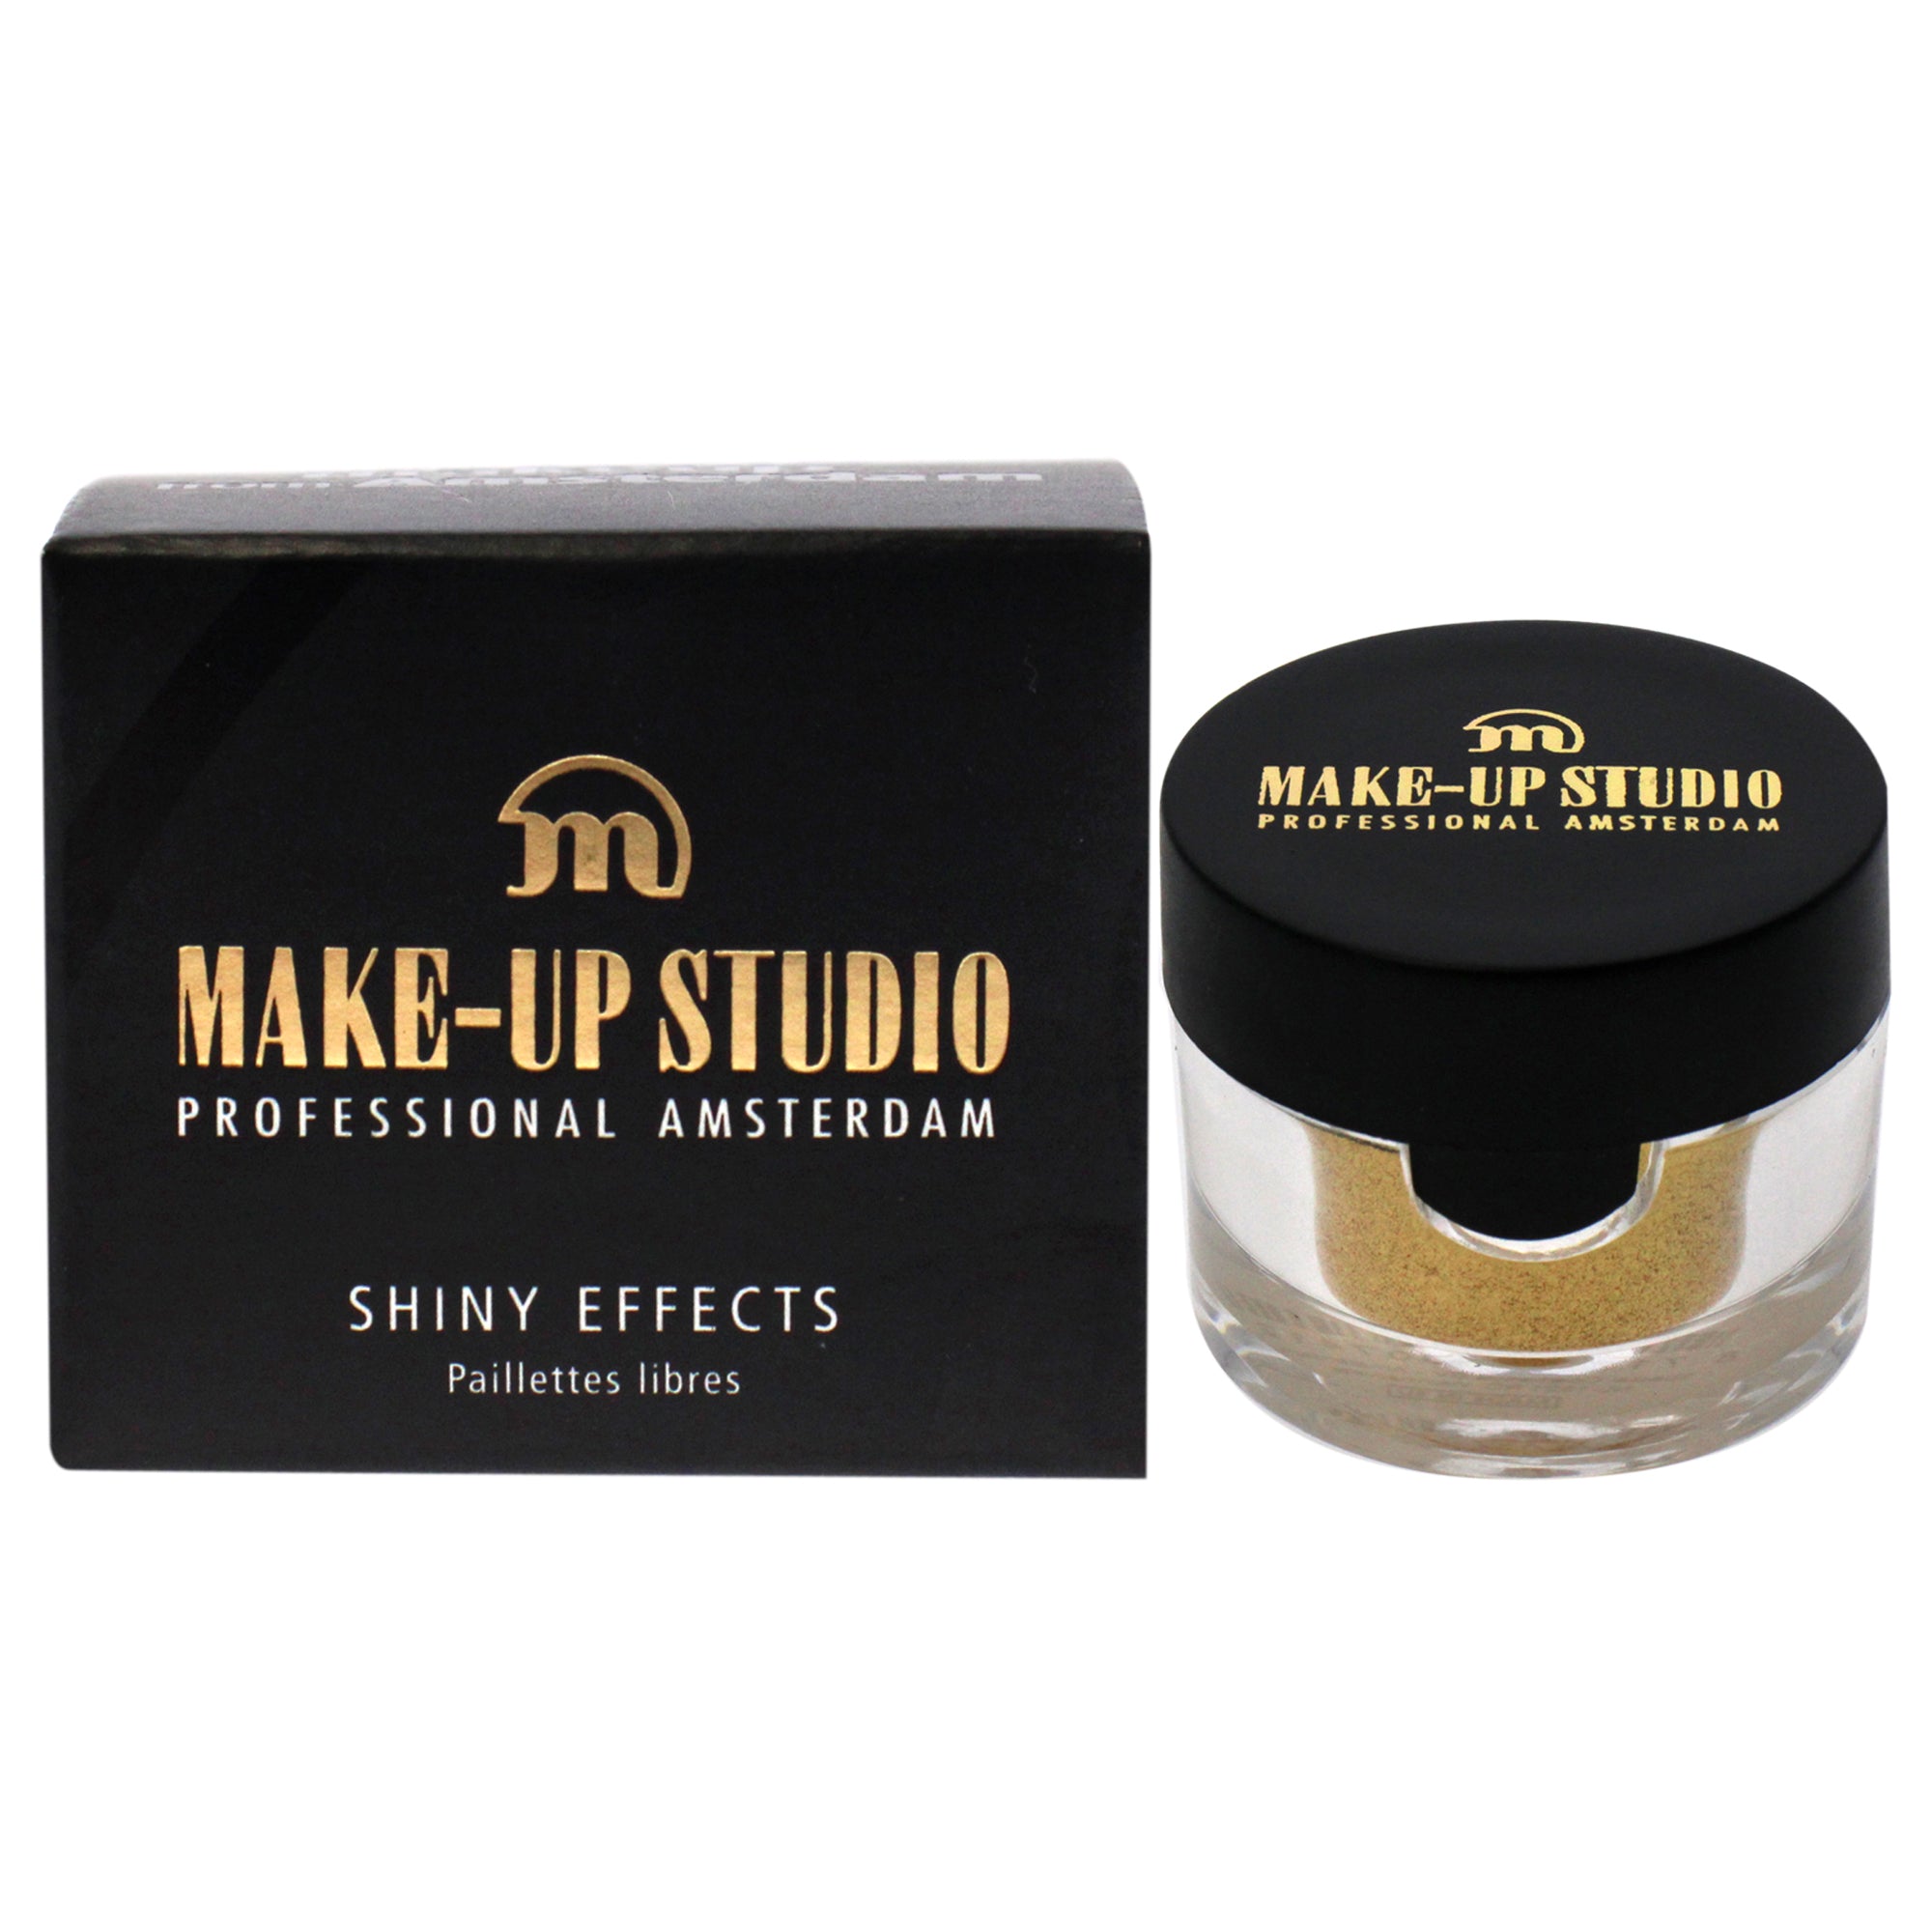 Shiny Effects - Gold by Make-Up Studio for Women - 0.14 oz Eye Shadow